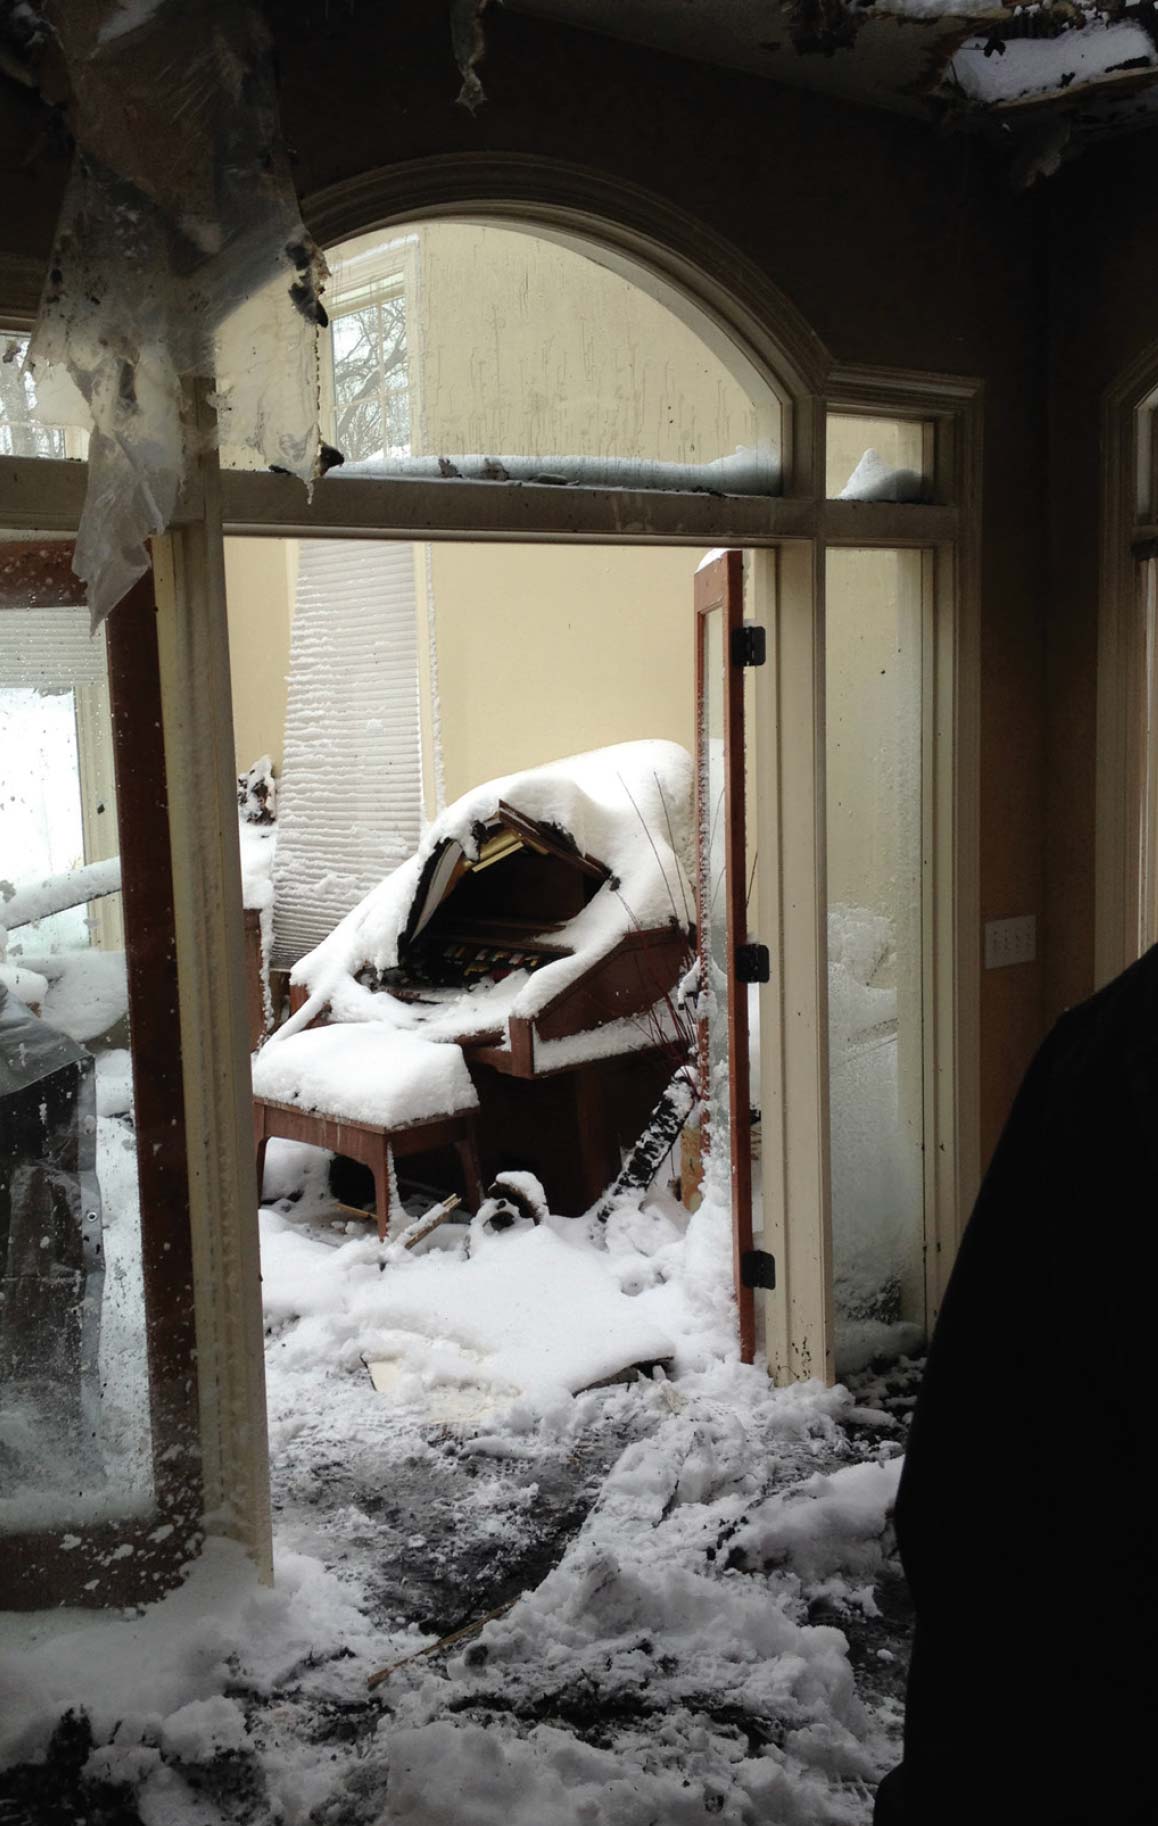 A broken piano in a local residential room with snow.
Keywords: local, residential